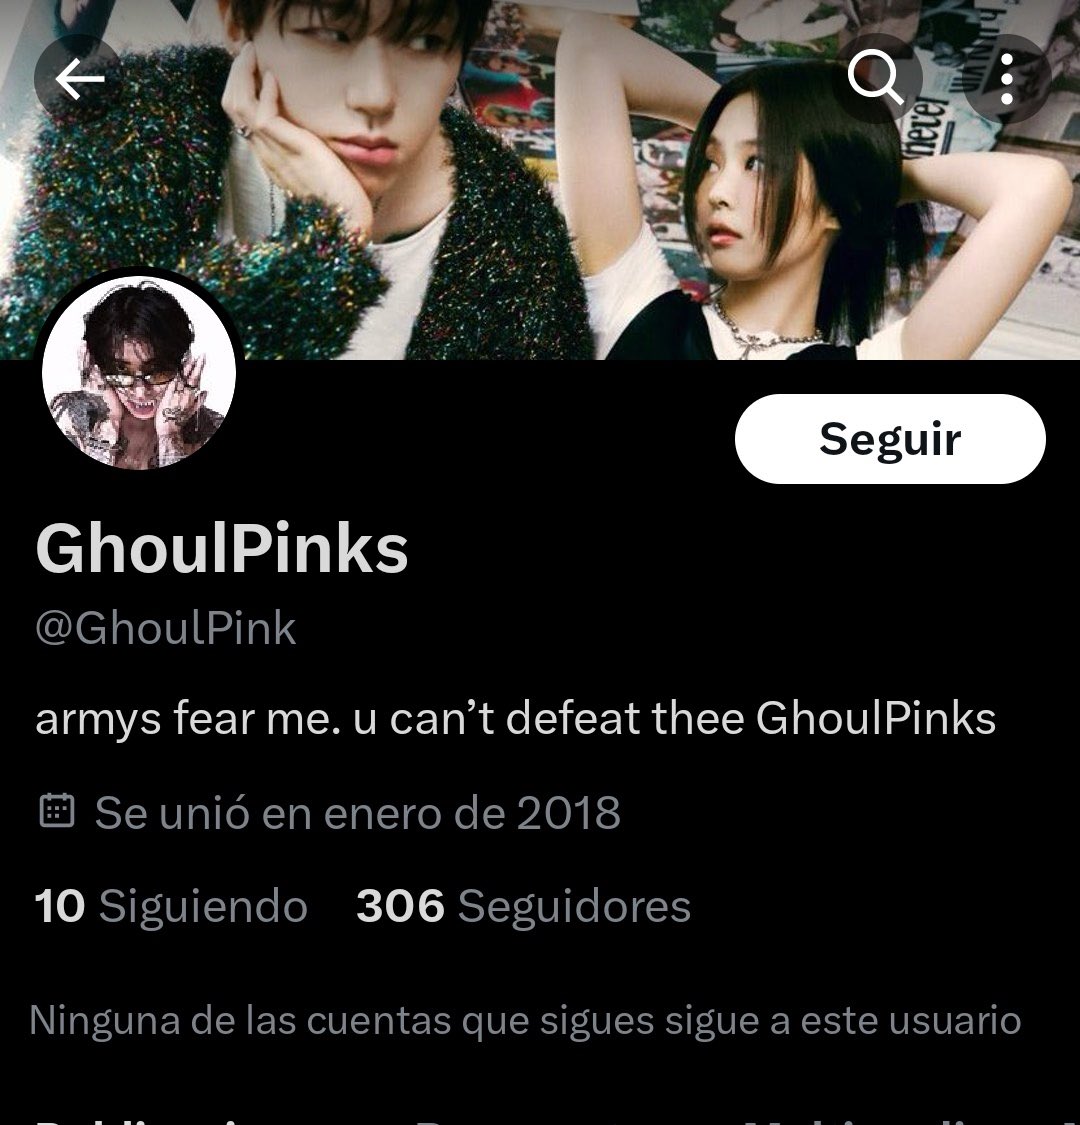 Hi @Support @X @elonmuskbuser user account @GhoulPinks has Been Suspended, now with new account @GhoulPink is trying to evade suspension. Take necessary action asap ‼️